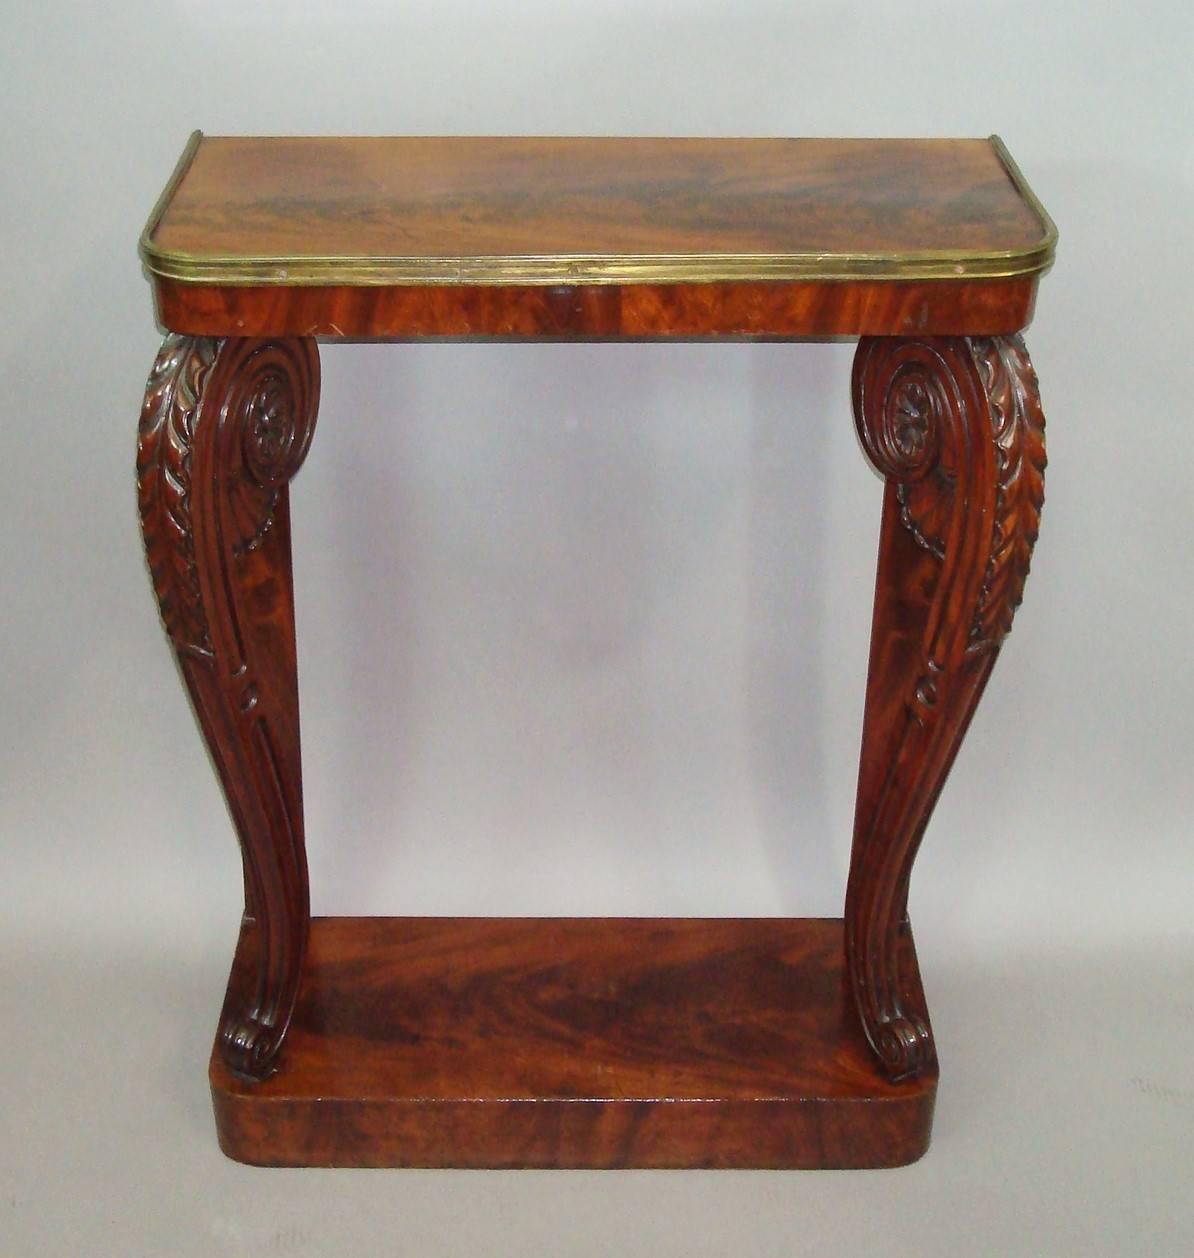 Good Regency figured mahogany console / pier table of narrow proportions; the well figured mahogany rectangular top with curved front corners and a brass moulding to the edge; raised on exaggerated scrolled legs with bold acanthus carving with fans